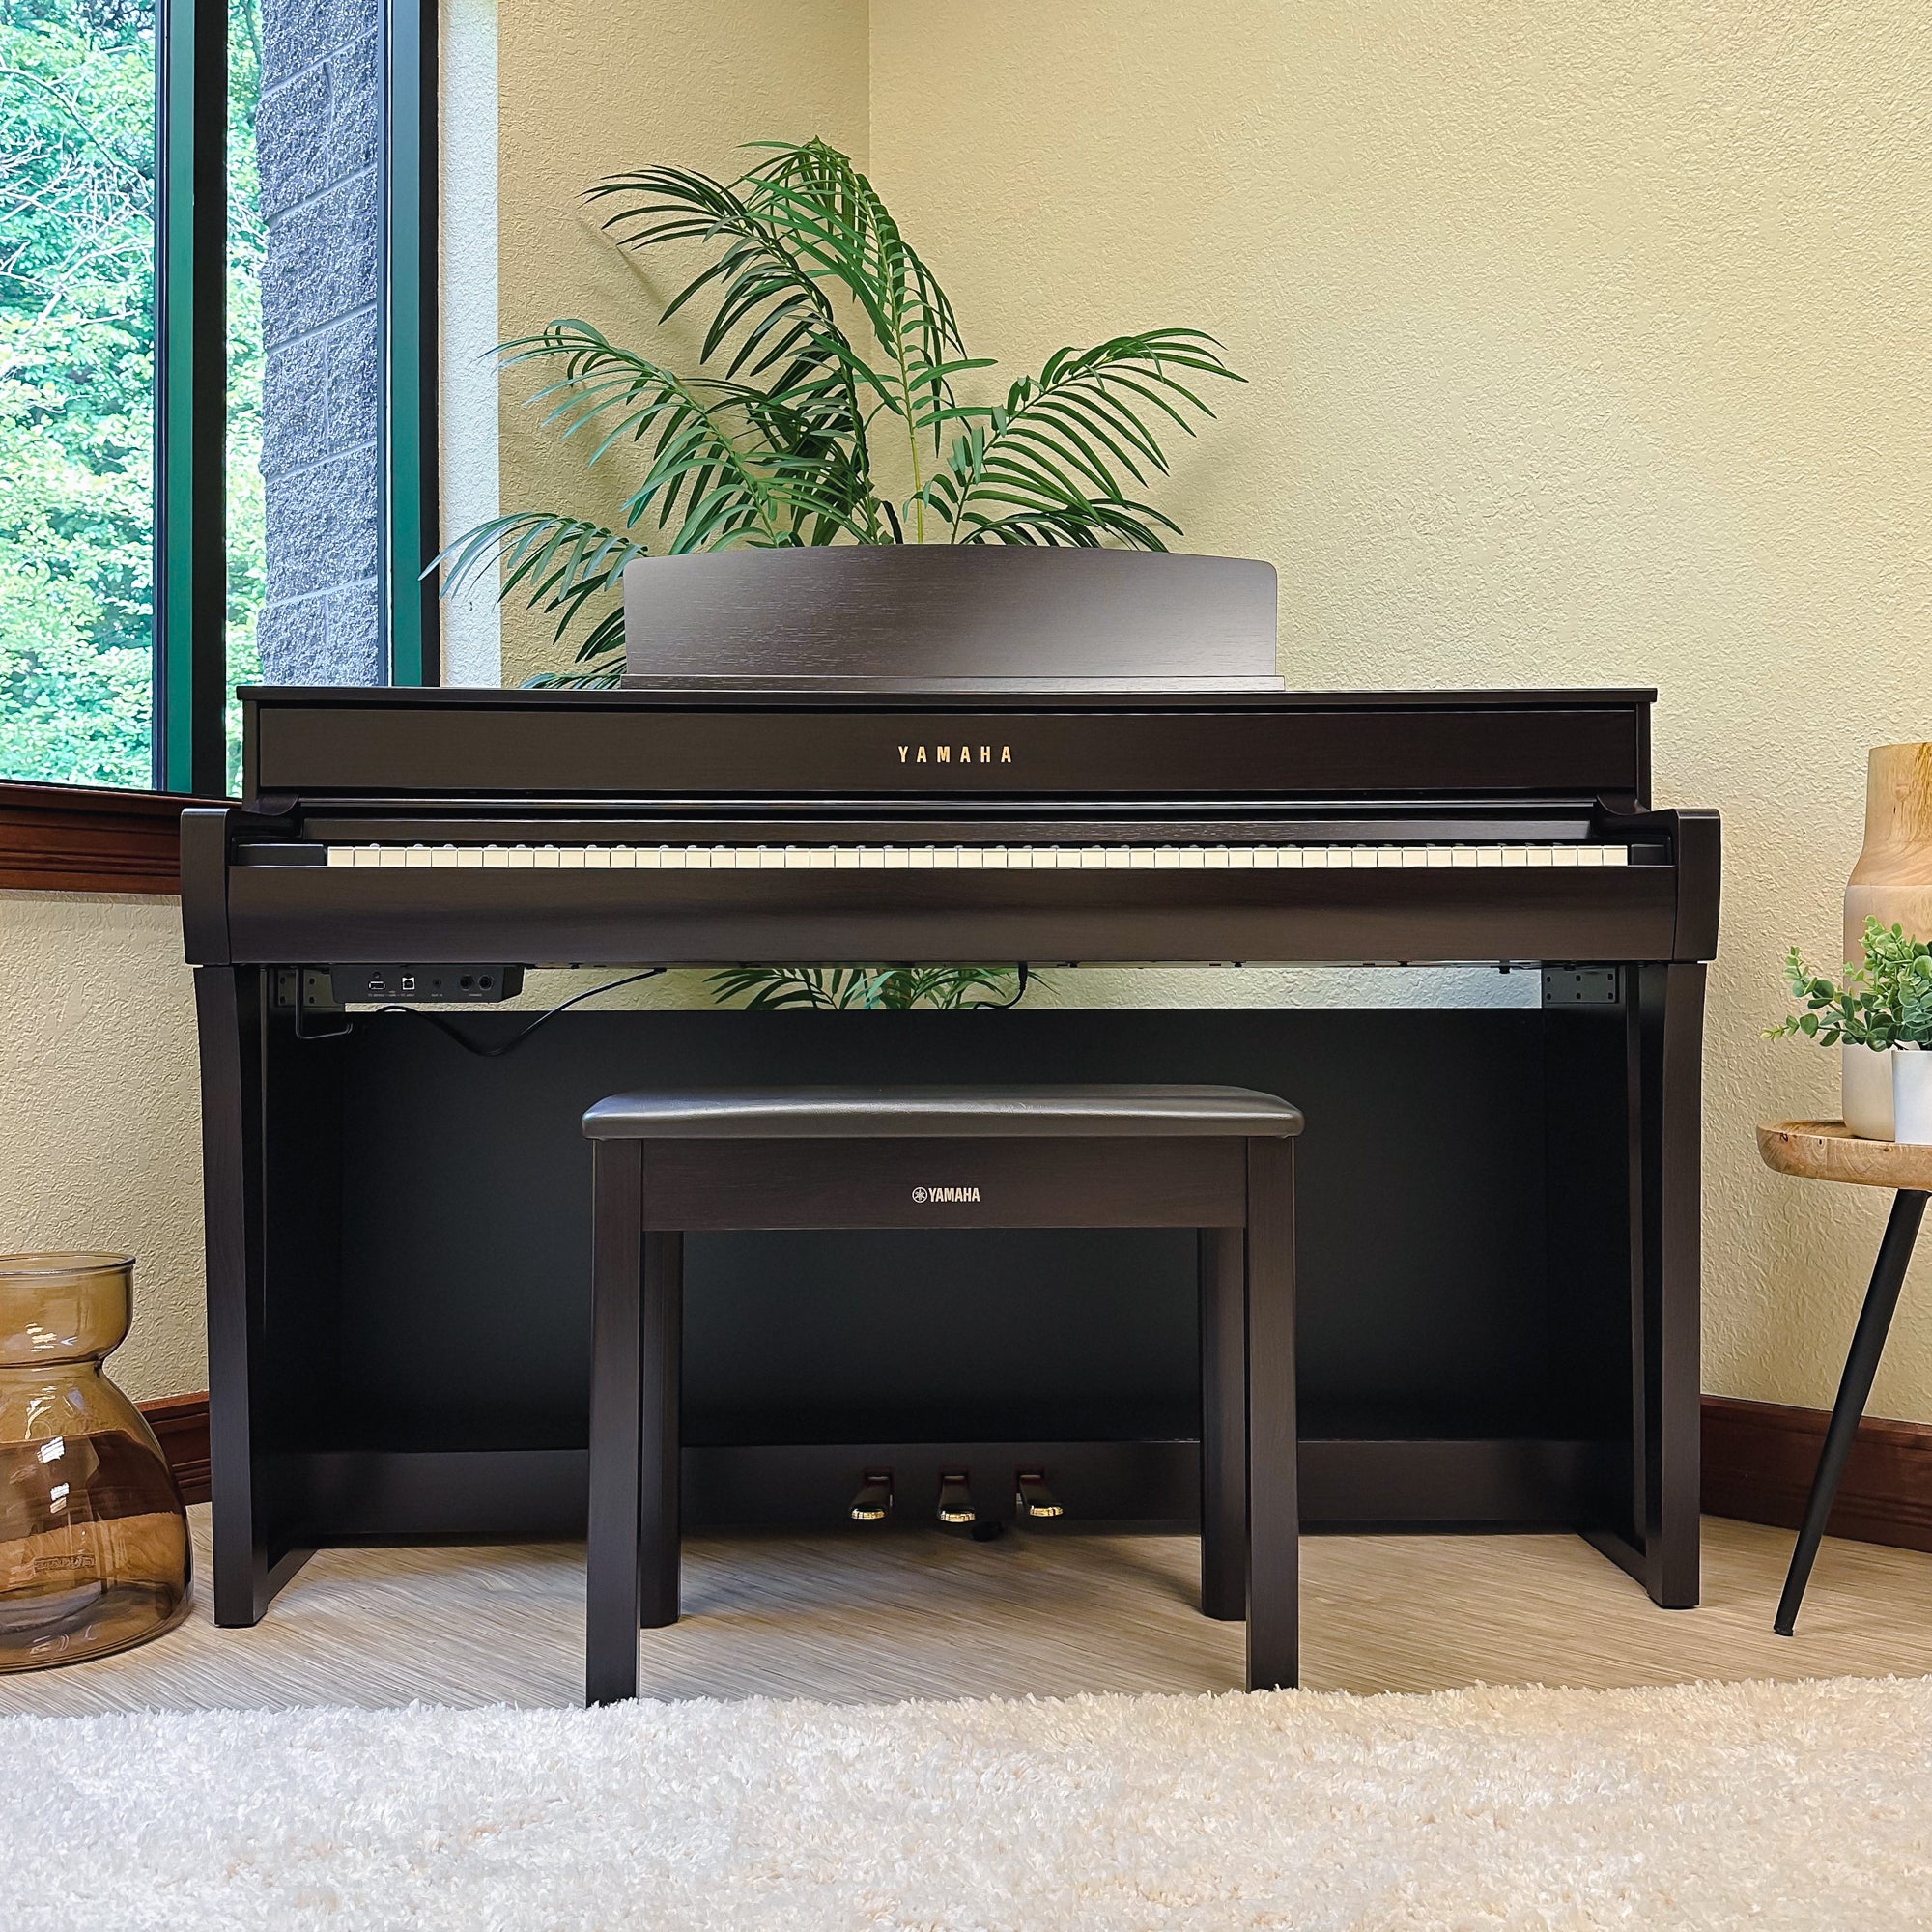 Yamaha Clavinova CLP-745 Digital Piano - Rosewood - front view from straight on in a stylish room